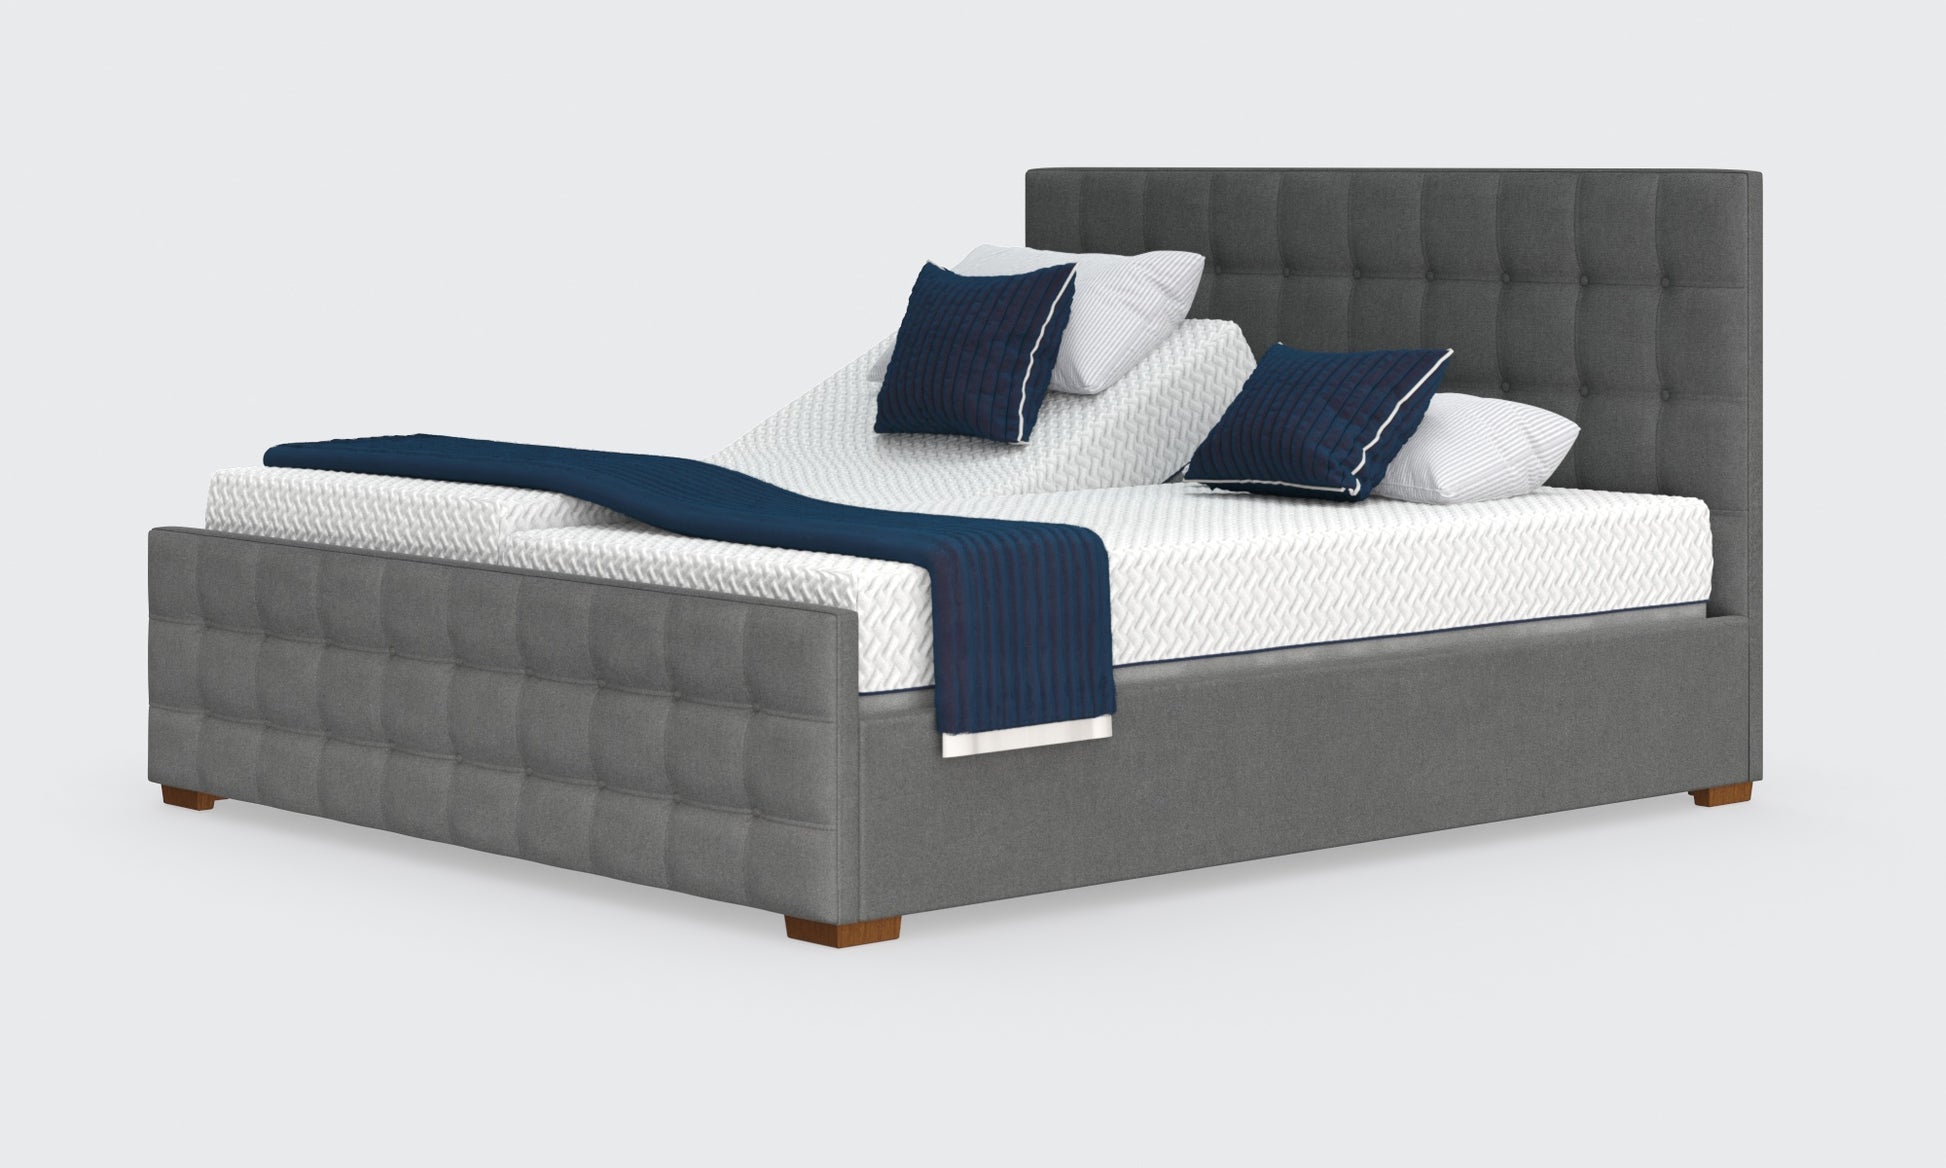 Edel 6ft bed and mattress in the anthracite material with the emerald headboard